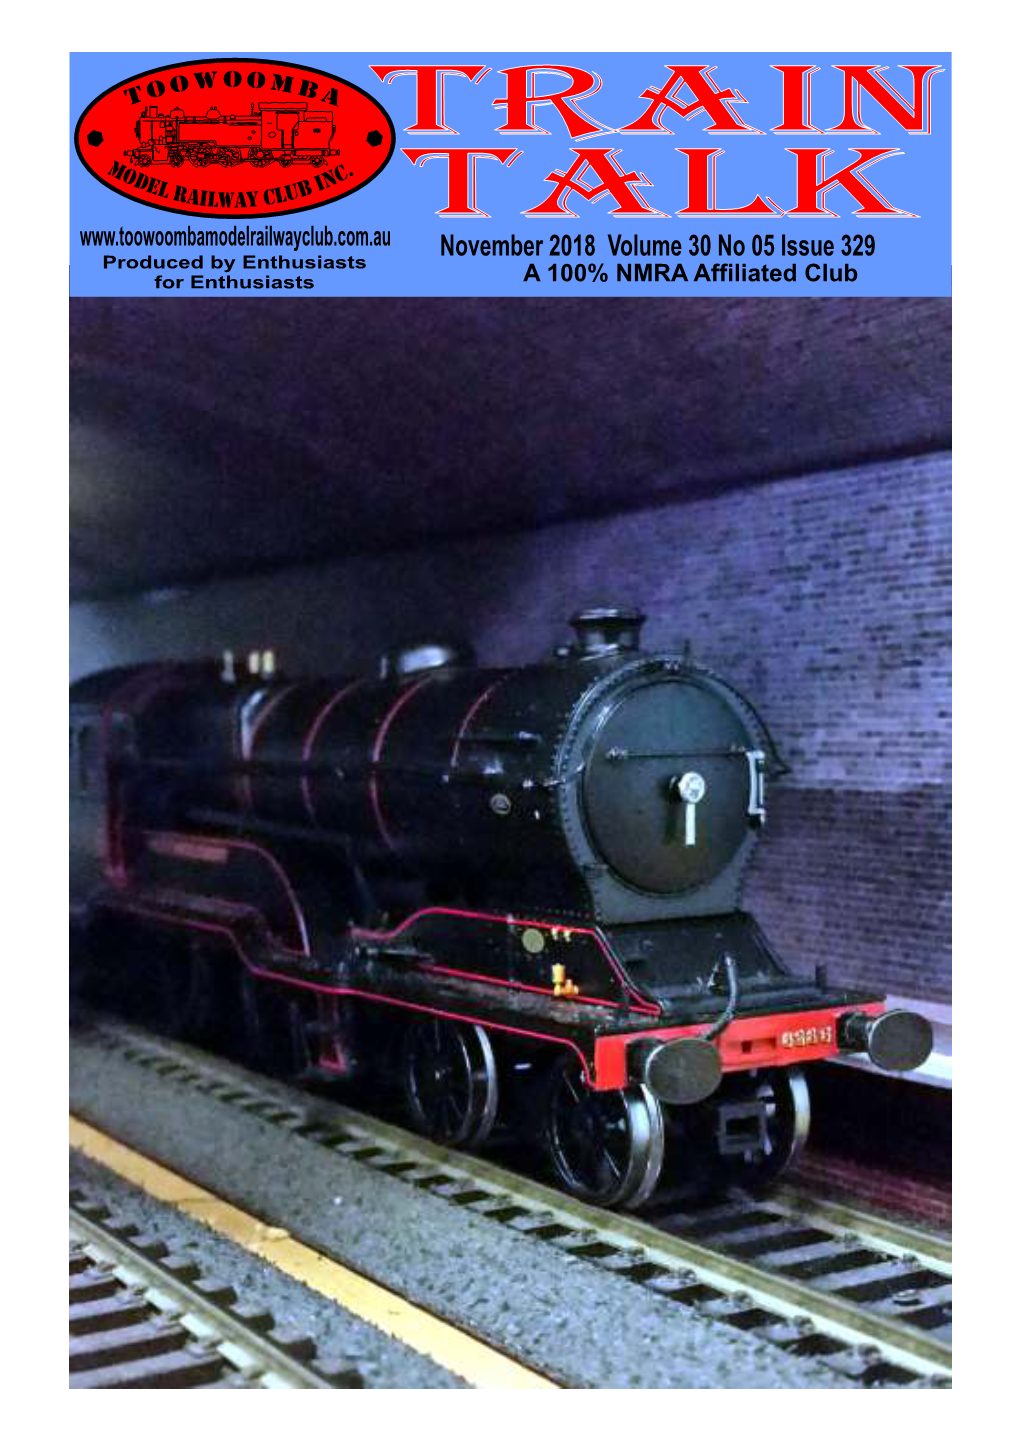 November 2018 Volume 30 No 05 Issue 329 a 100% NMRA Affiliated Club 2 ‘Train Talk’ Volume 30 No 05 (Issue #329) November 2018 ABN 32 998 681 418